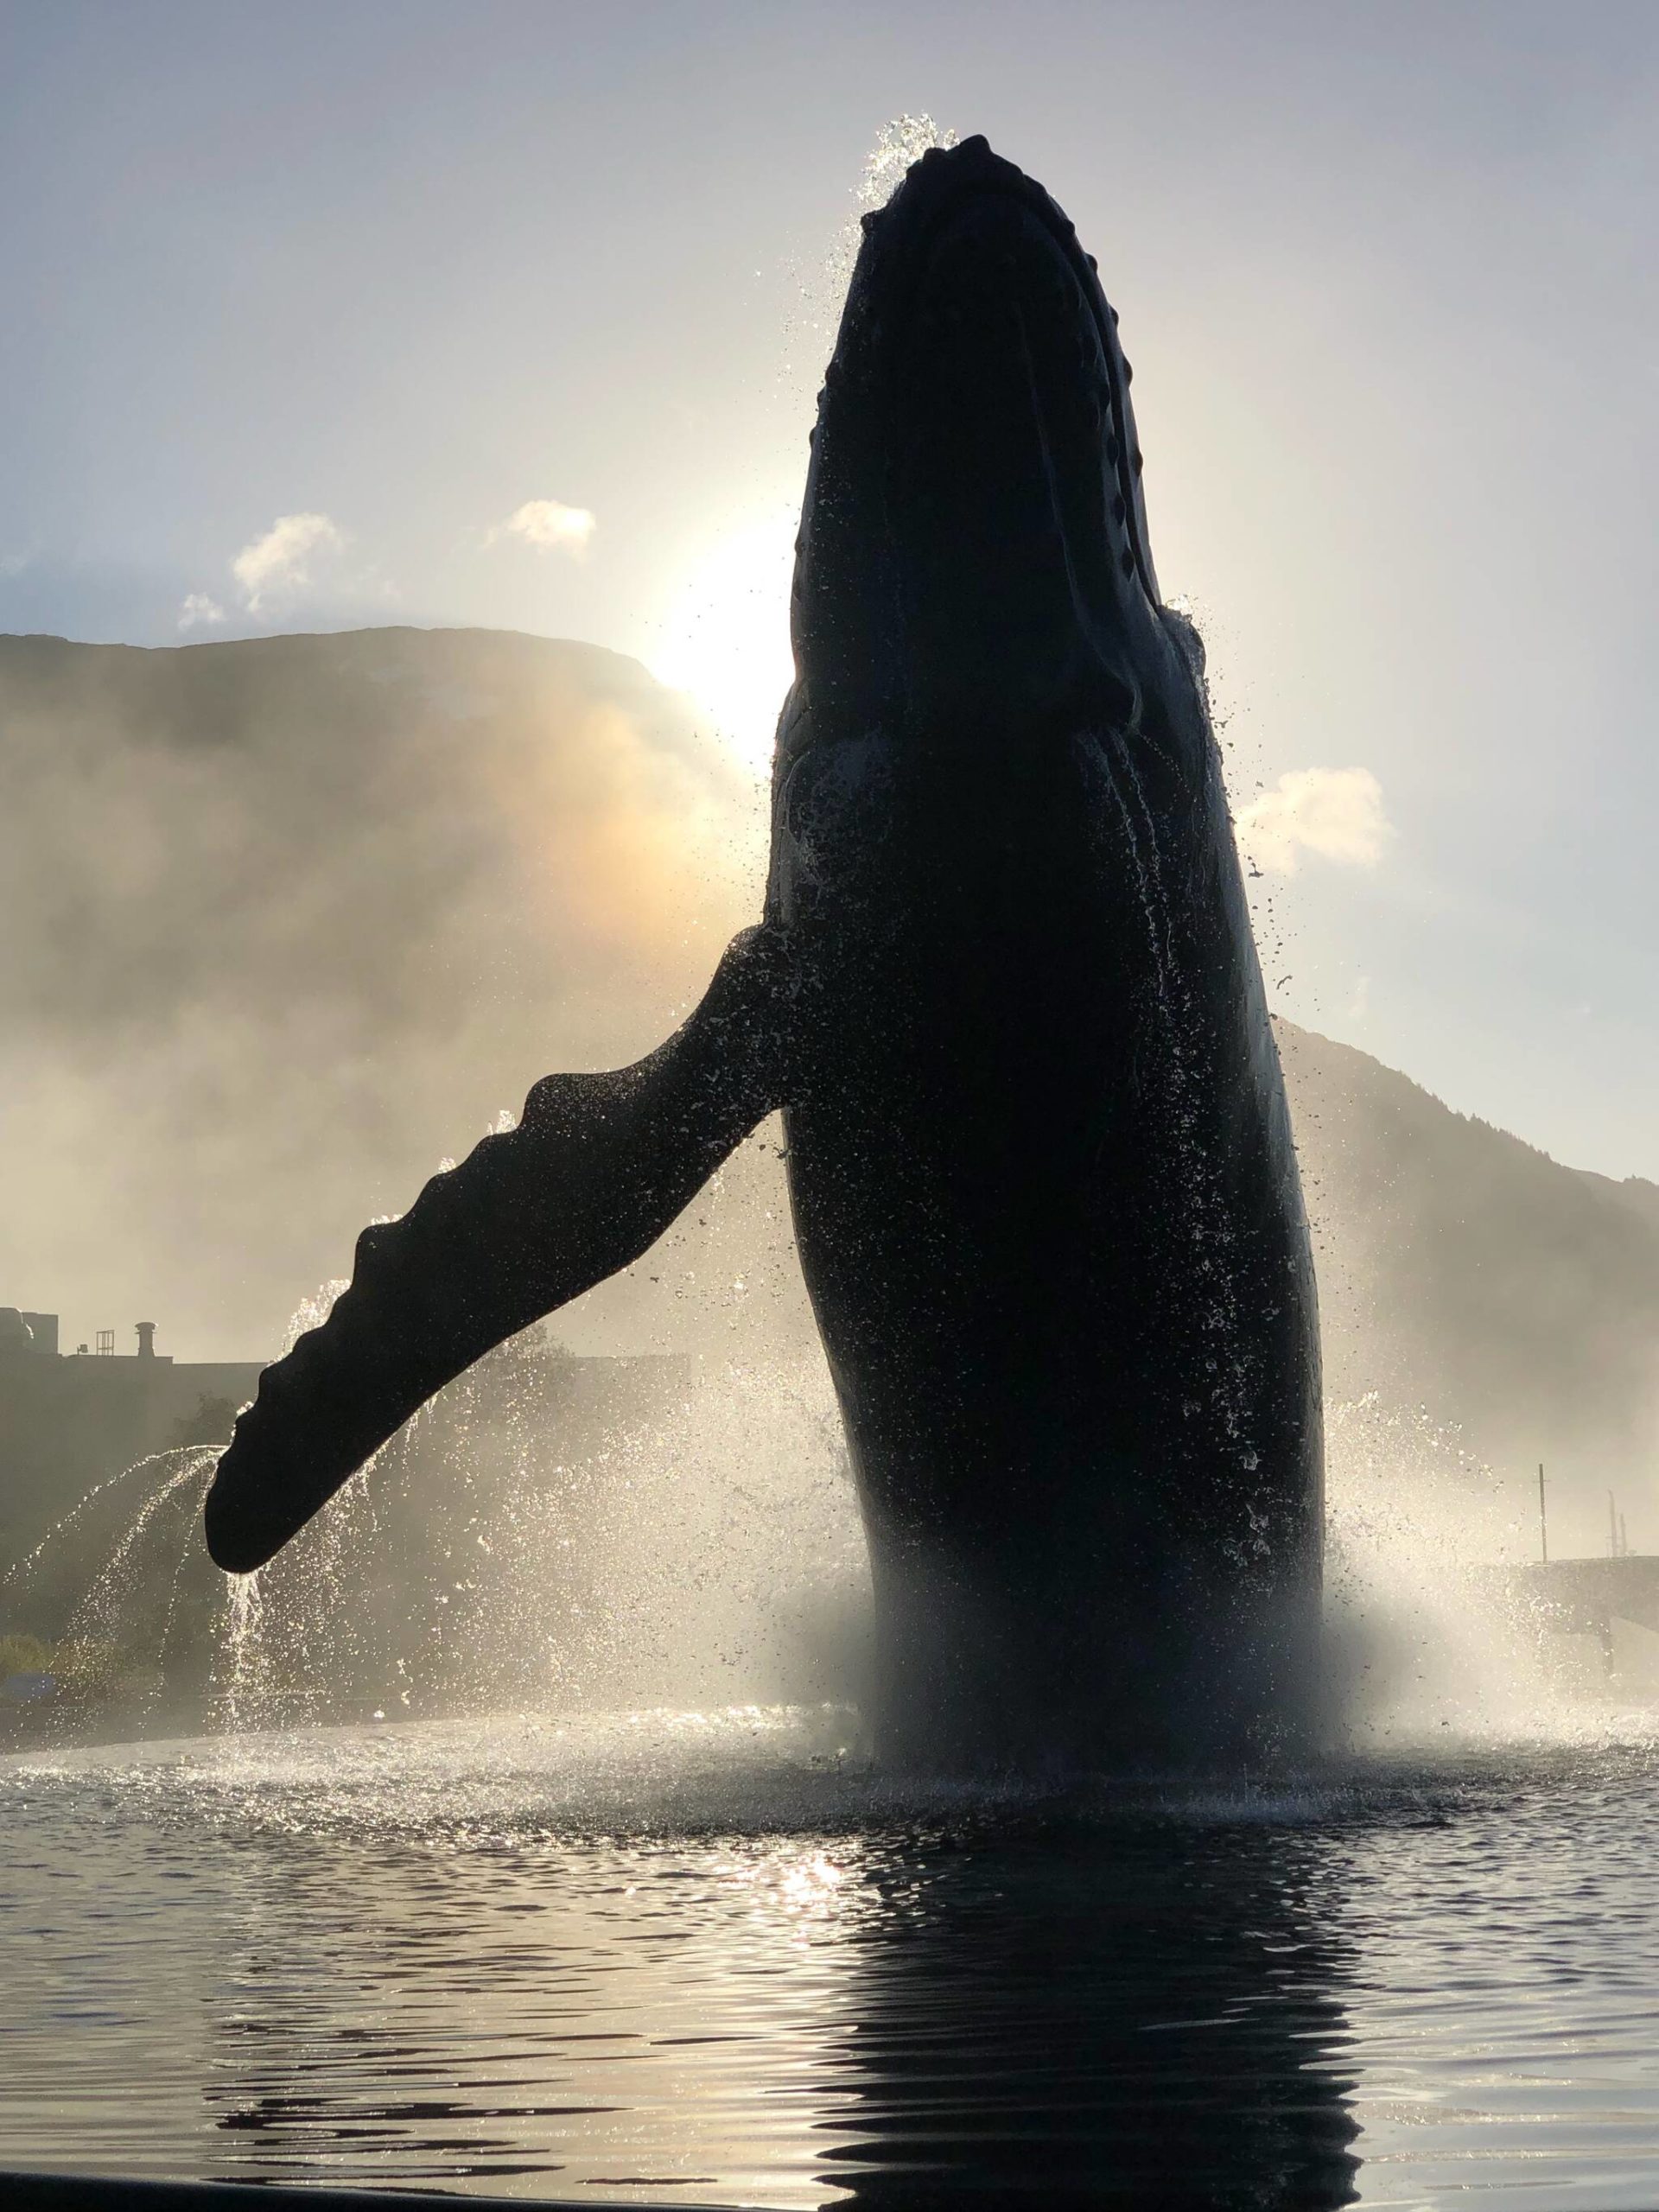 Tahku the Whale Sculpture blots out the sun. (Courtesy Photo / Alissa Noe)